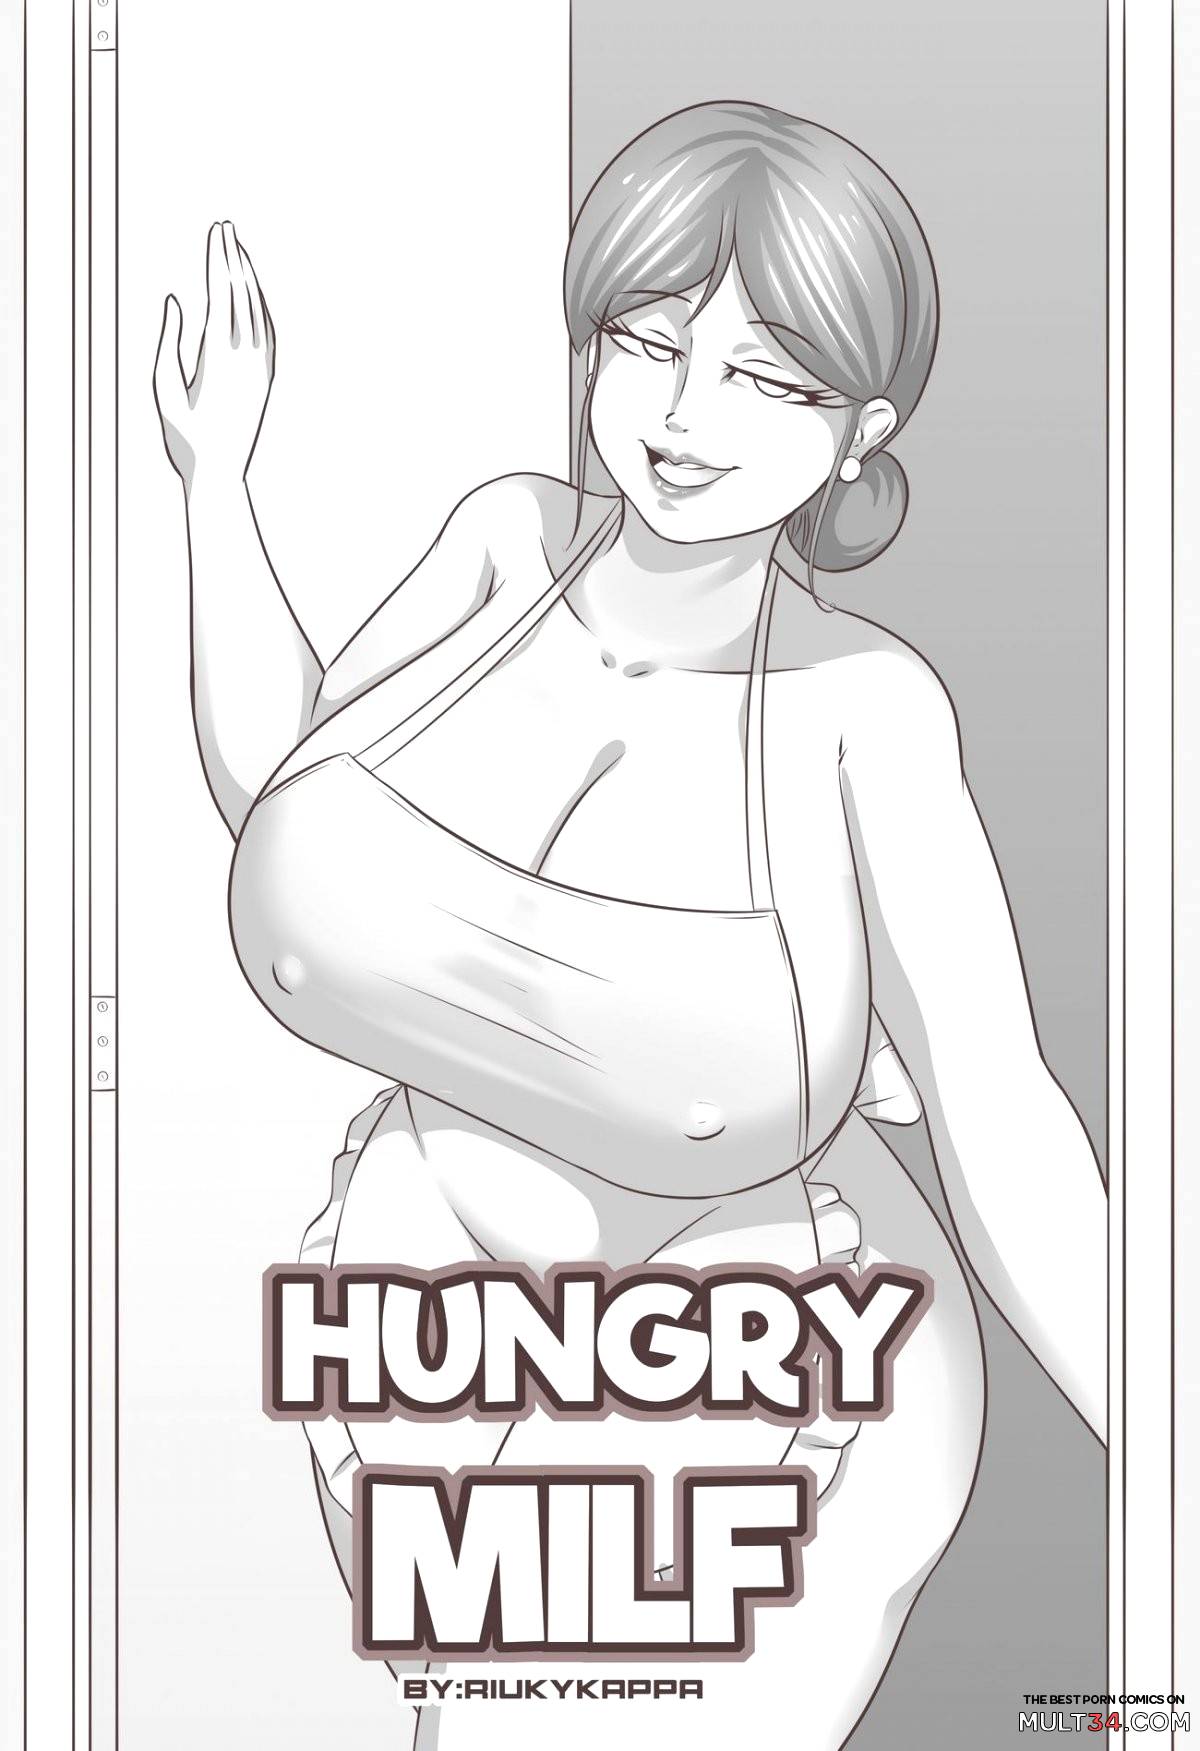 Hungry Milf page 1